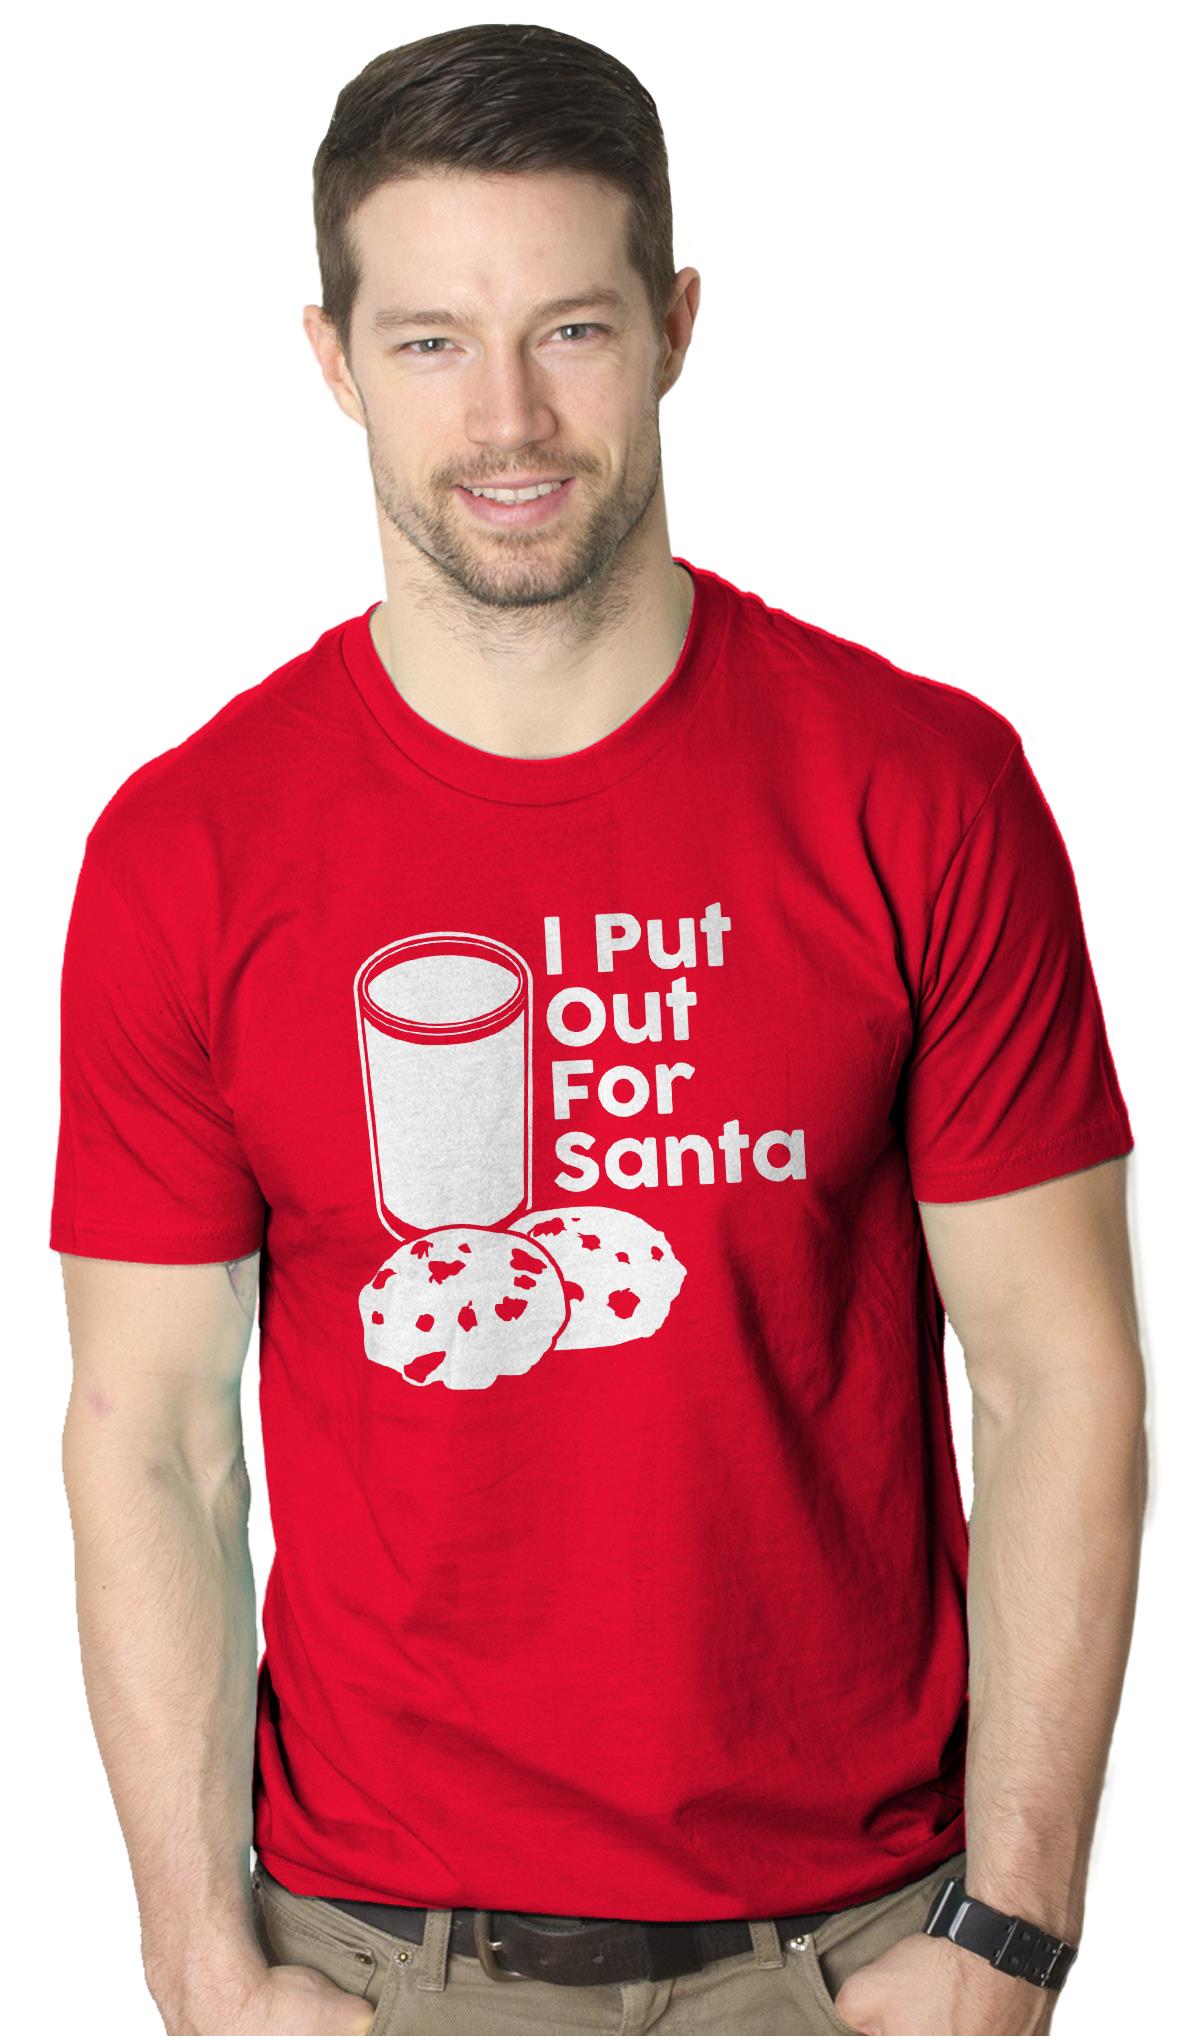 I Put Out for Santa T Shirt Funny Festive Holiday Christmas Tee  XXL